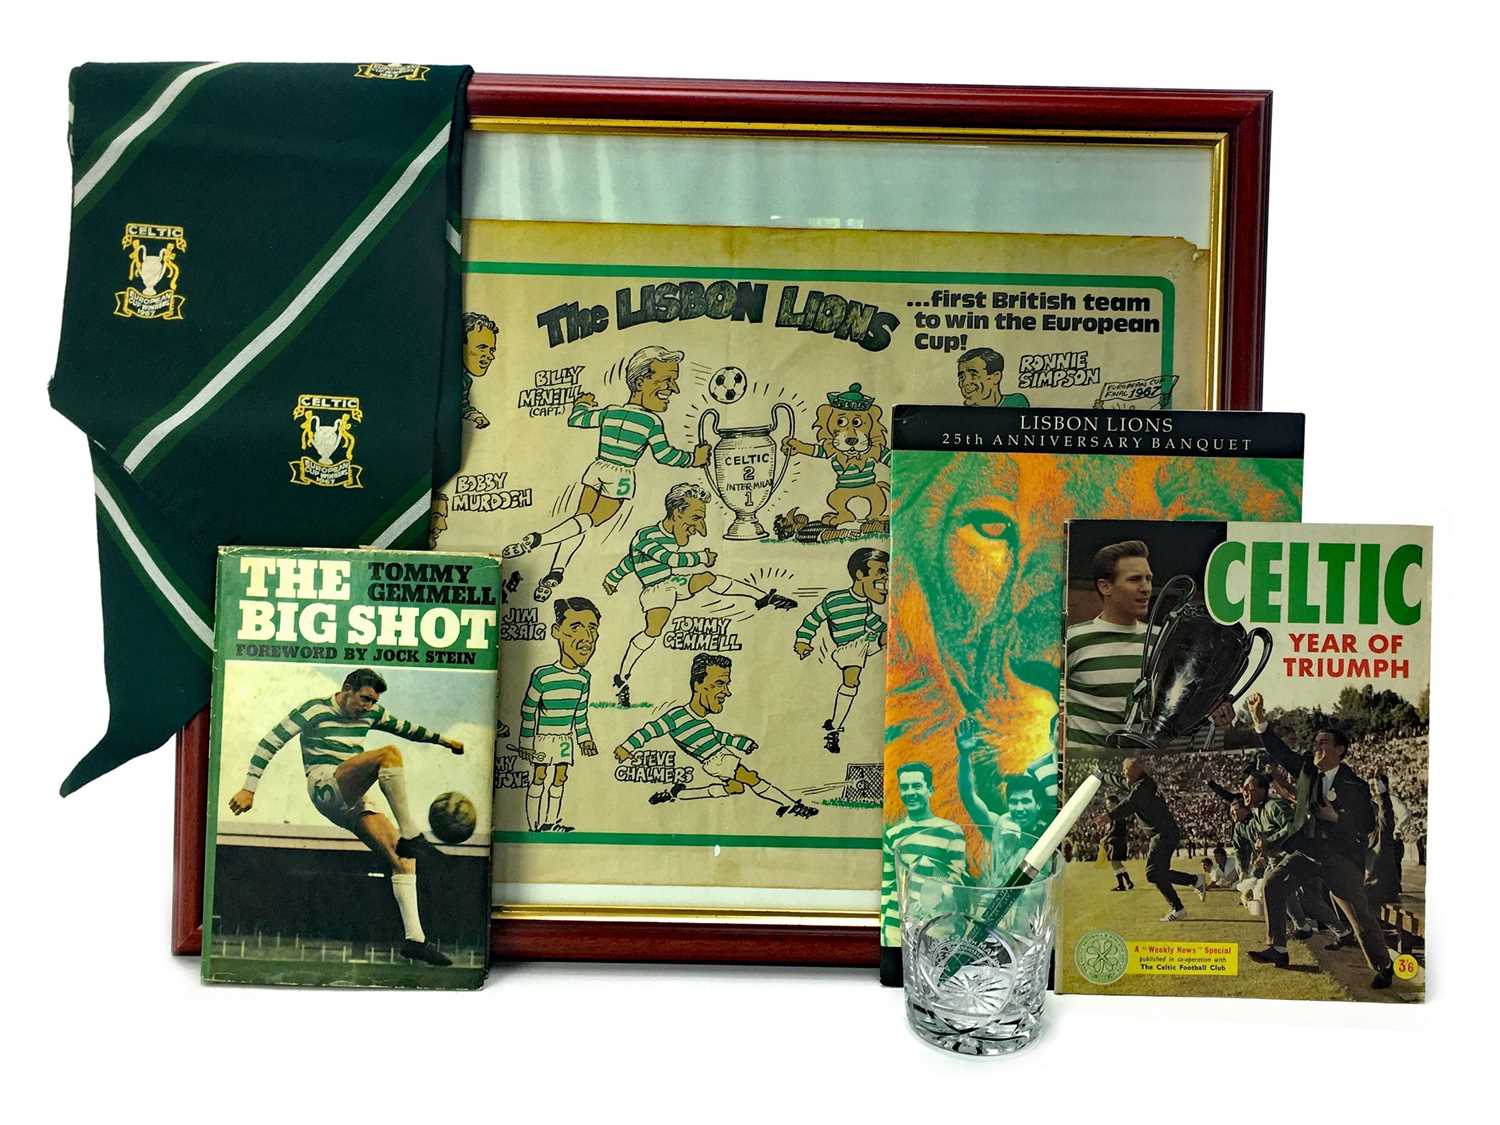 Lot 1748 - A SIGNED LISBON LIONS 25TH ANNIVESARY BANQUET PROGRAMME ALONG WITH OTHER RELATED PIECES